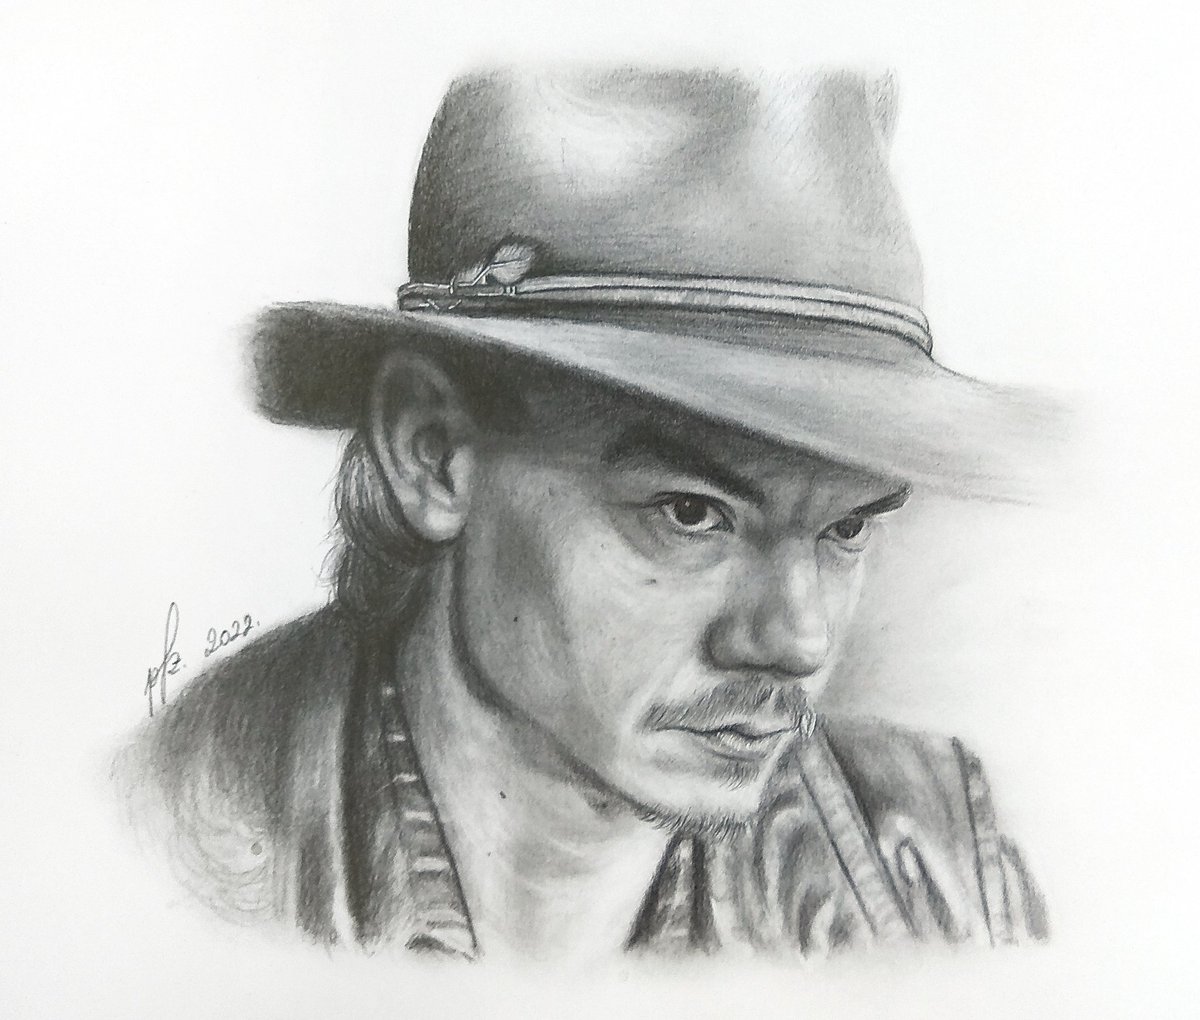 My drawing of @SangsterThomas as Benny Watts in The Queen's Gambit ♟️👑
Graphite on paper, A4 size.

#ThomasBrodieSangster #TheQueensGambit #bennywatts #ThomasSangster #portraitdrawing #portraitart #pencildrawing #pencilportrait #graphiteart #realismart #pszart
@NetflixTheQG